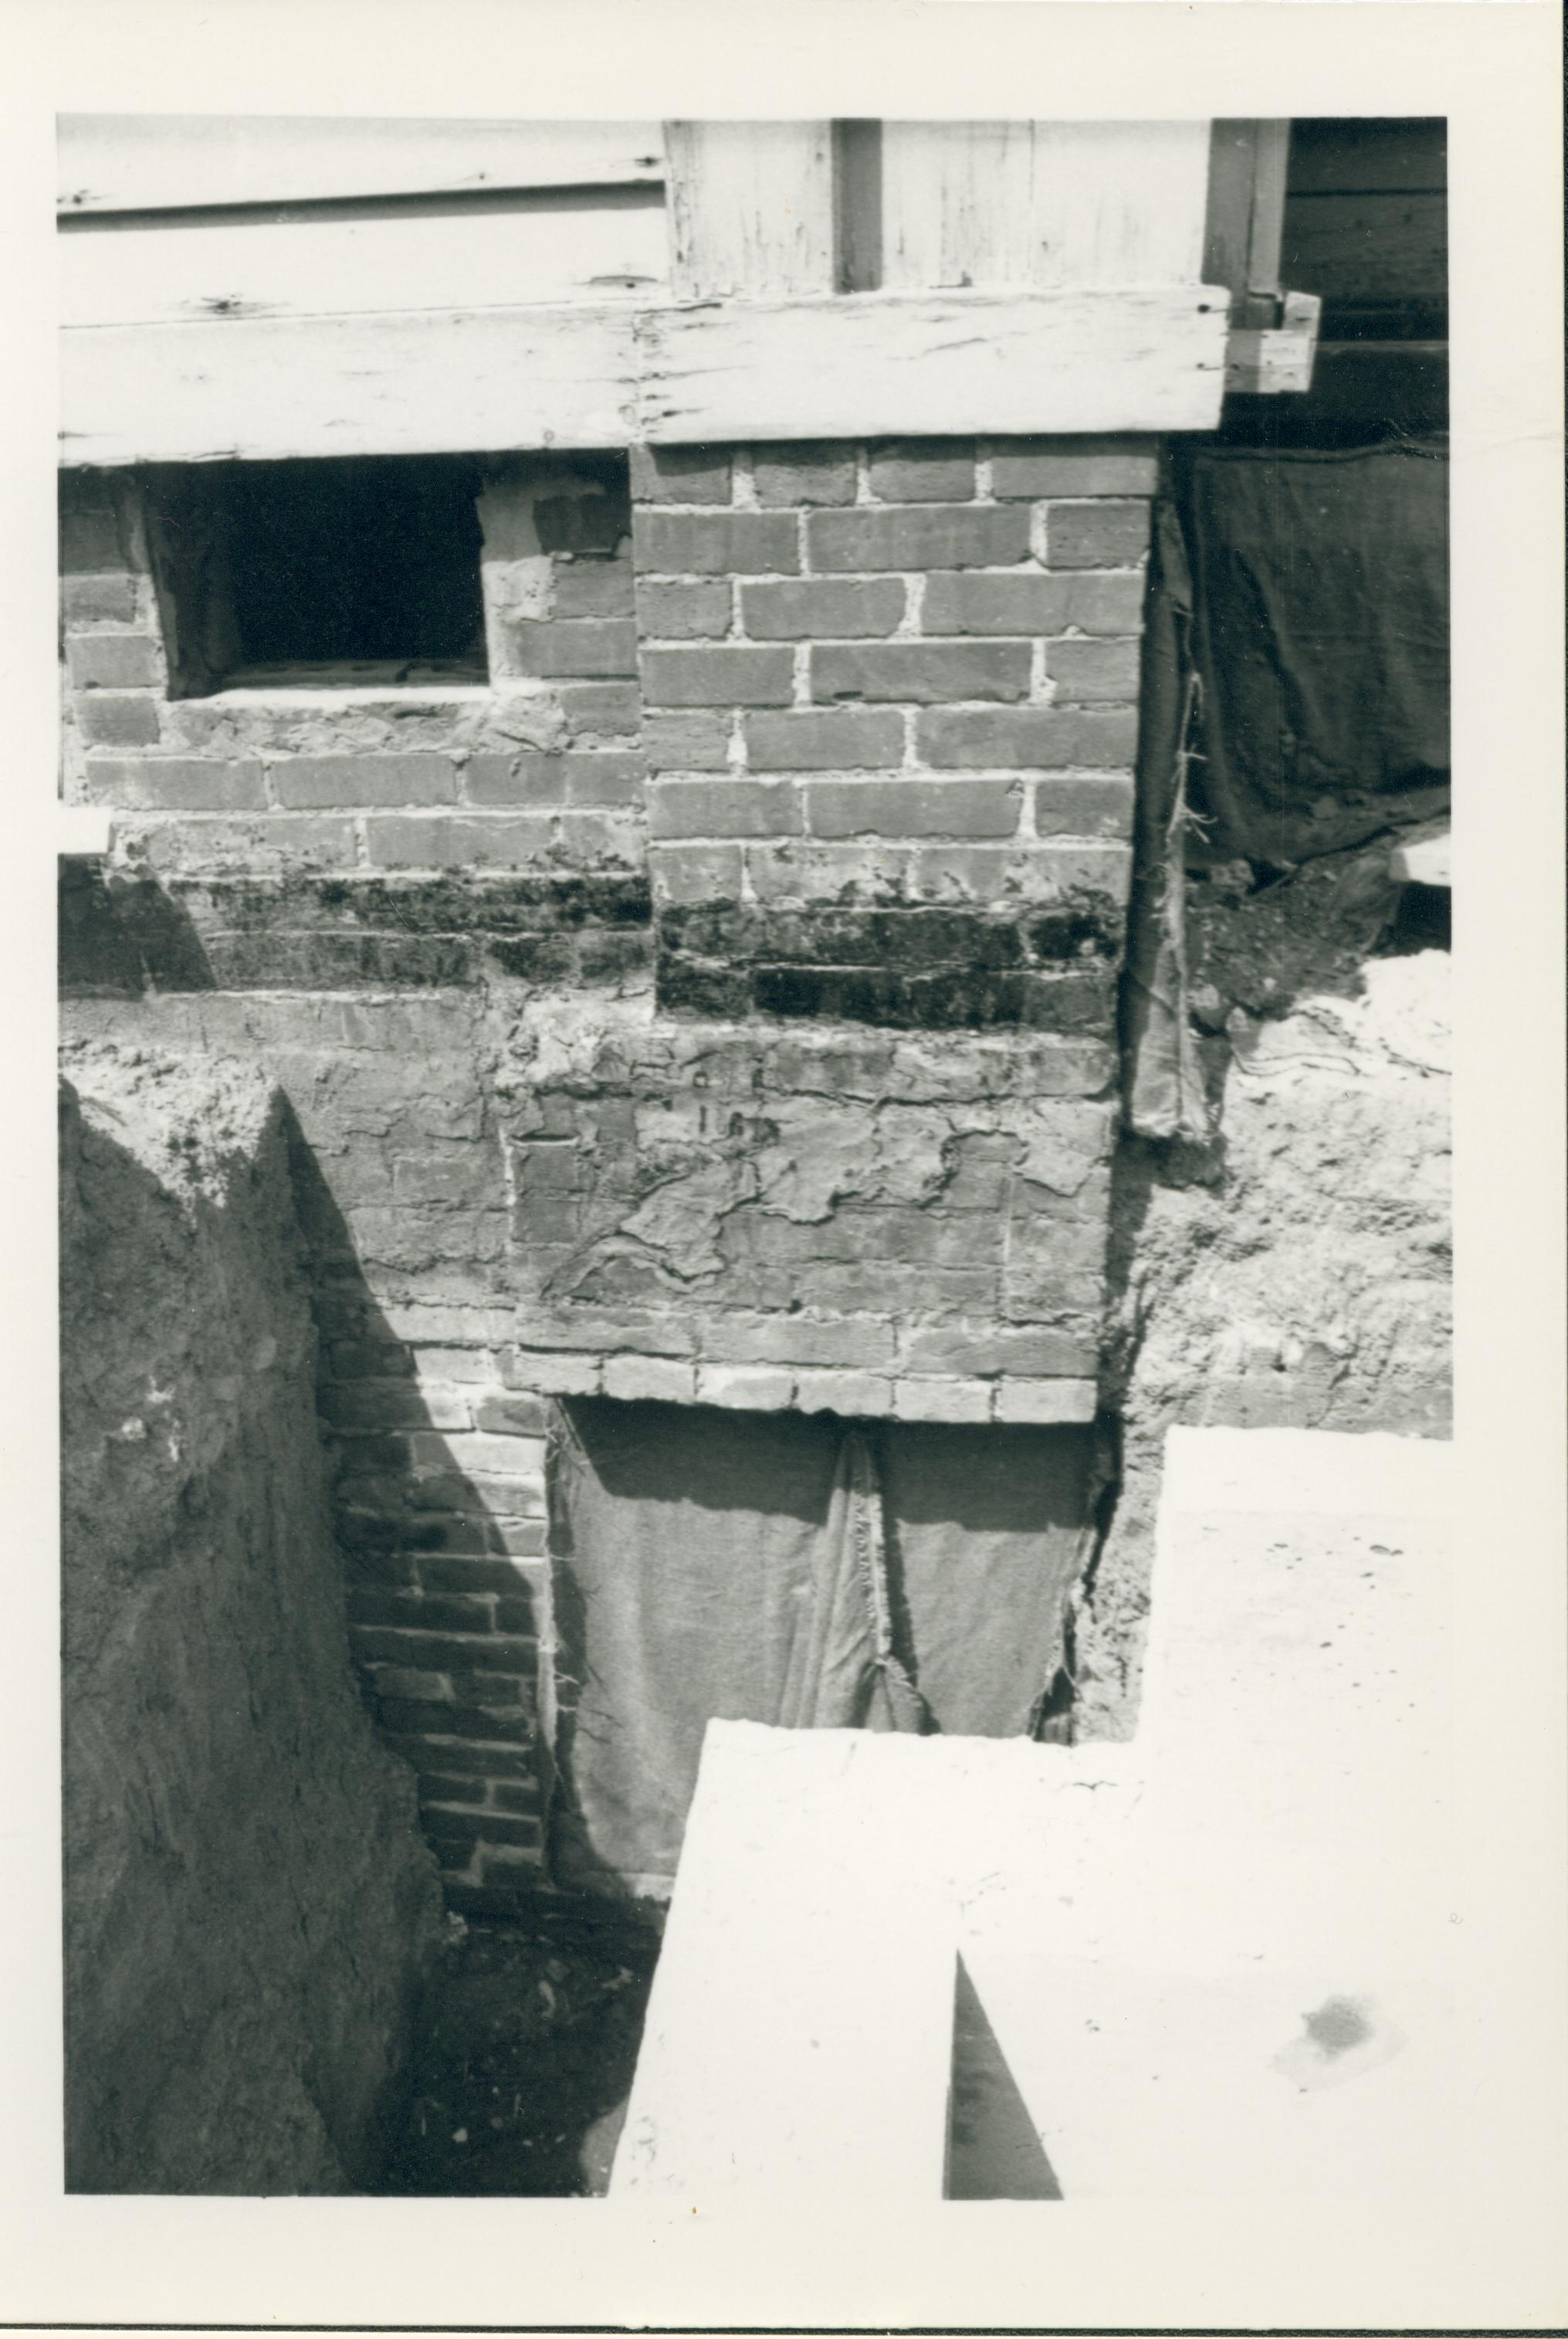 An exposed section of the south face of the Lincoln Home foundation uncovered during the 1987-1988 Restoration. The south porch and a basement window can be seen. Photographer facing north.